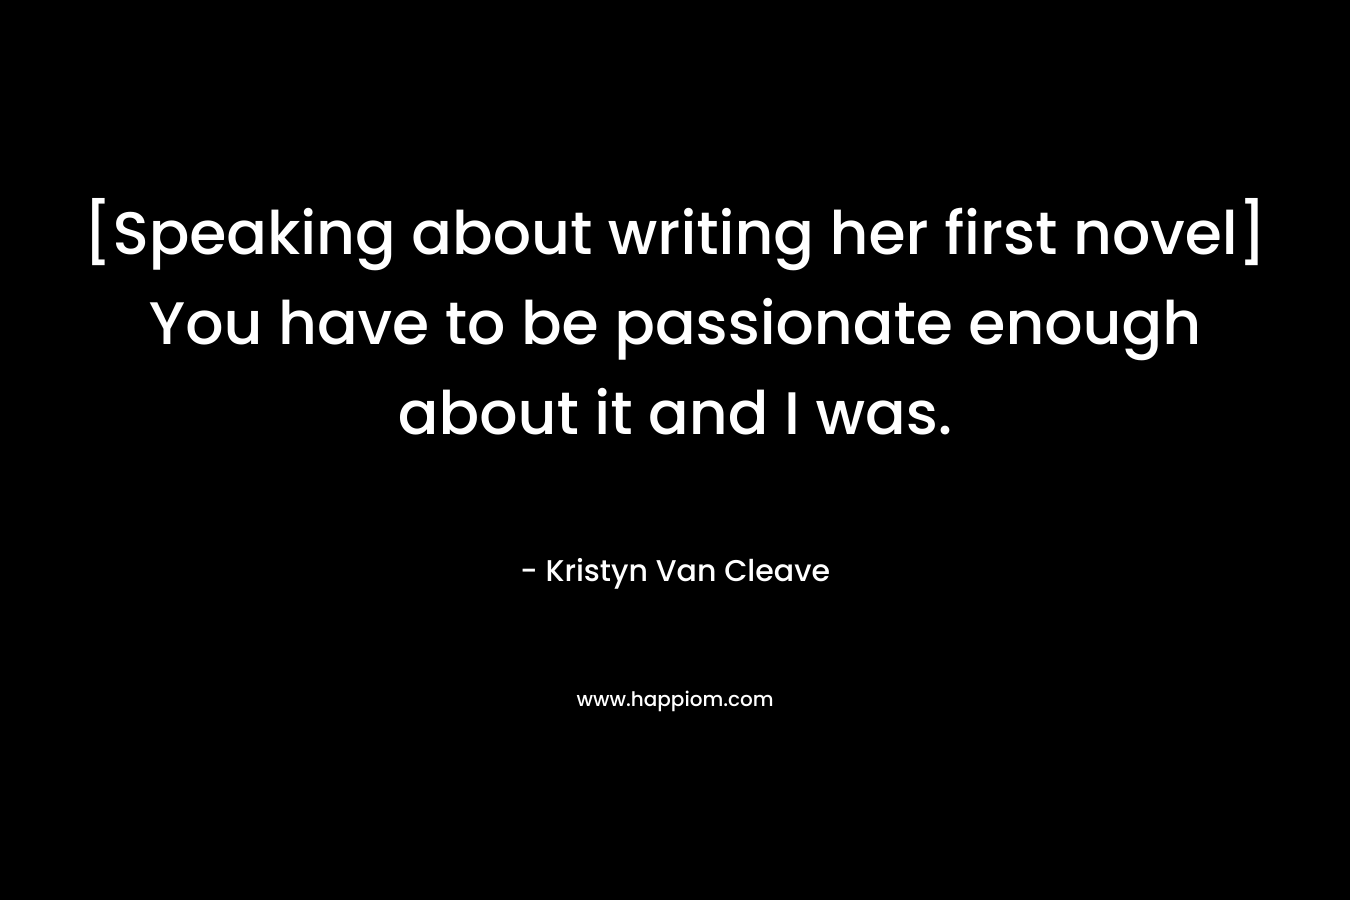 [Speaking about writing her first novel] You have to be passionate enough about it and I was.